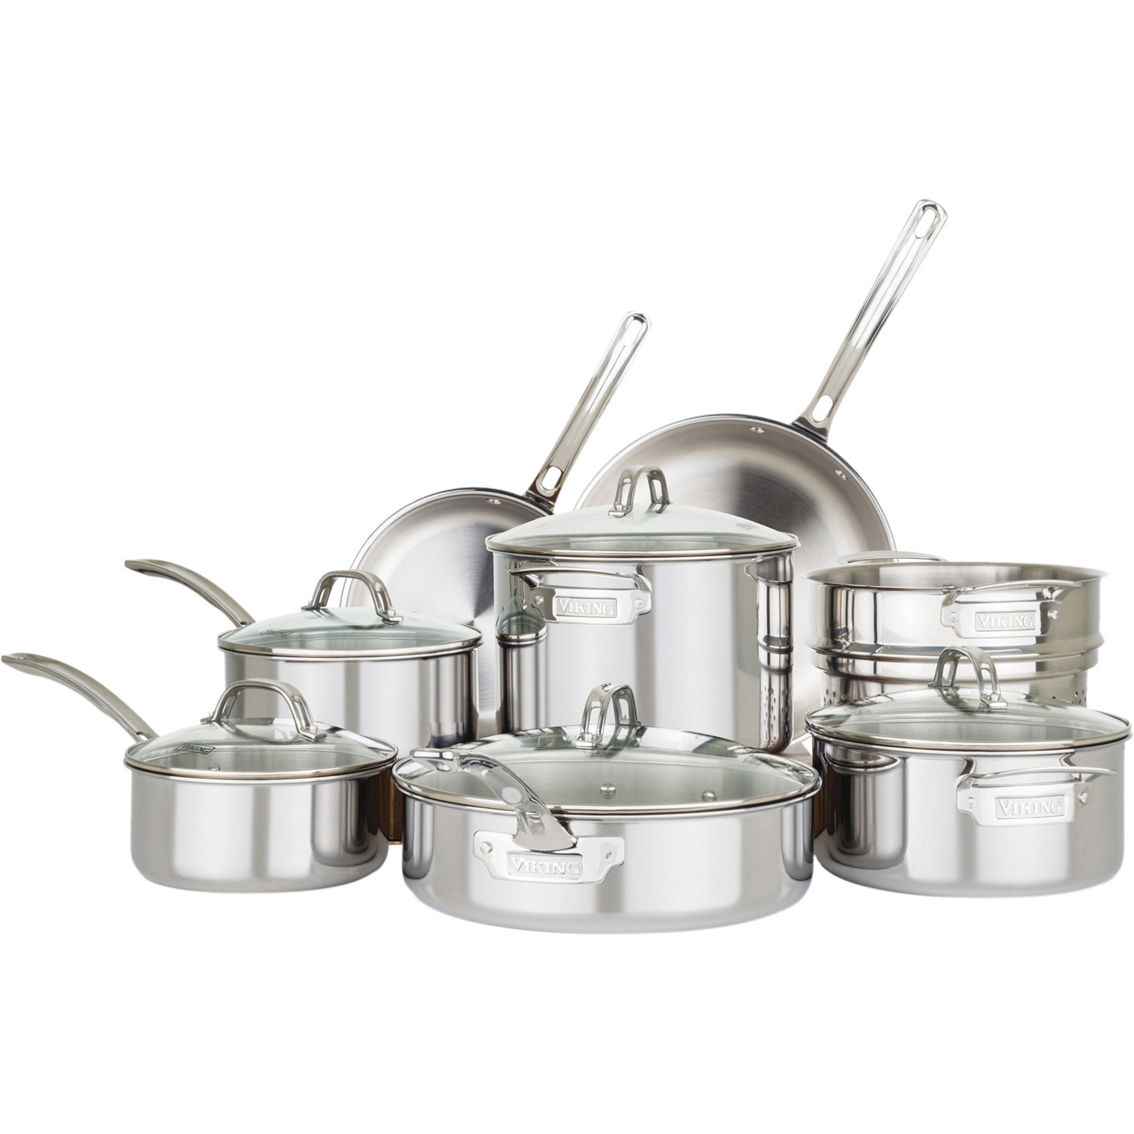 Viking 3-Ply Stainless Steel Cookware Set with Glass Lids